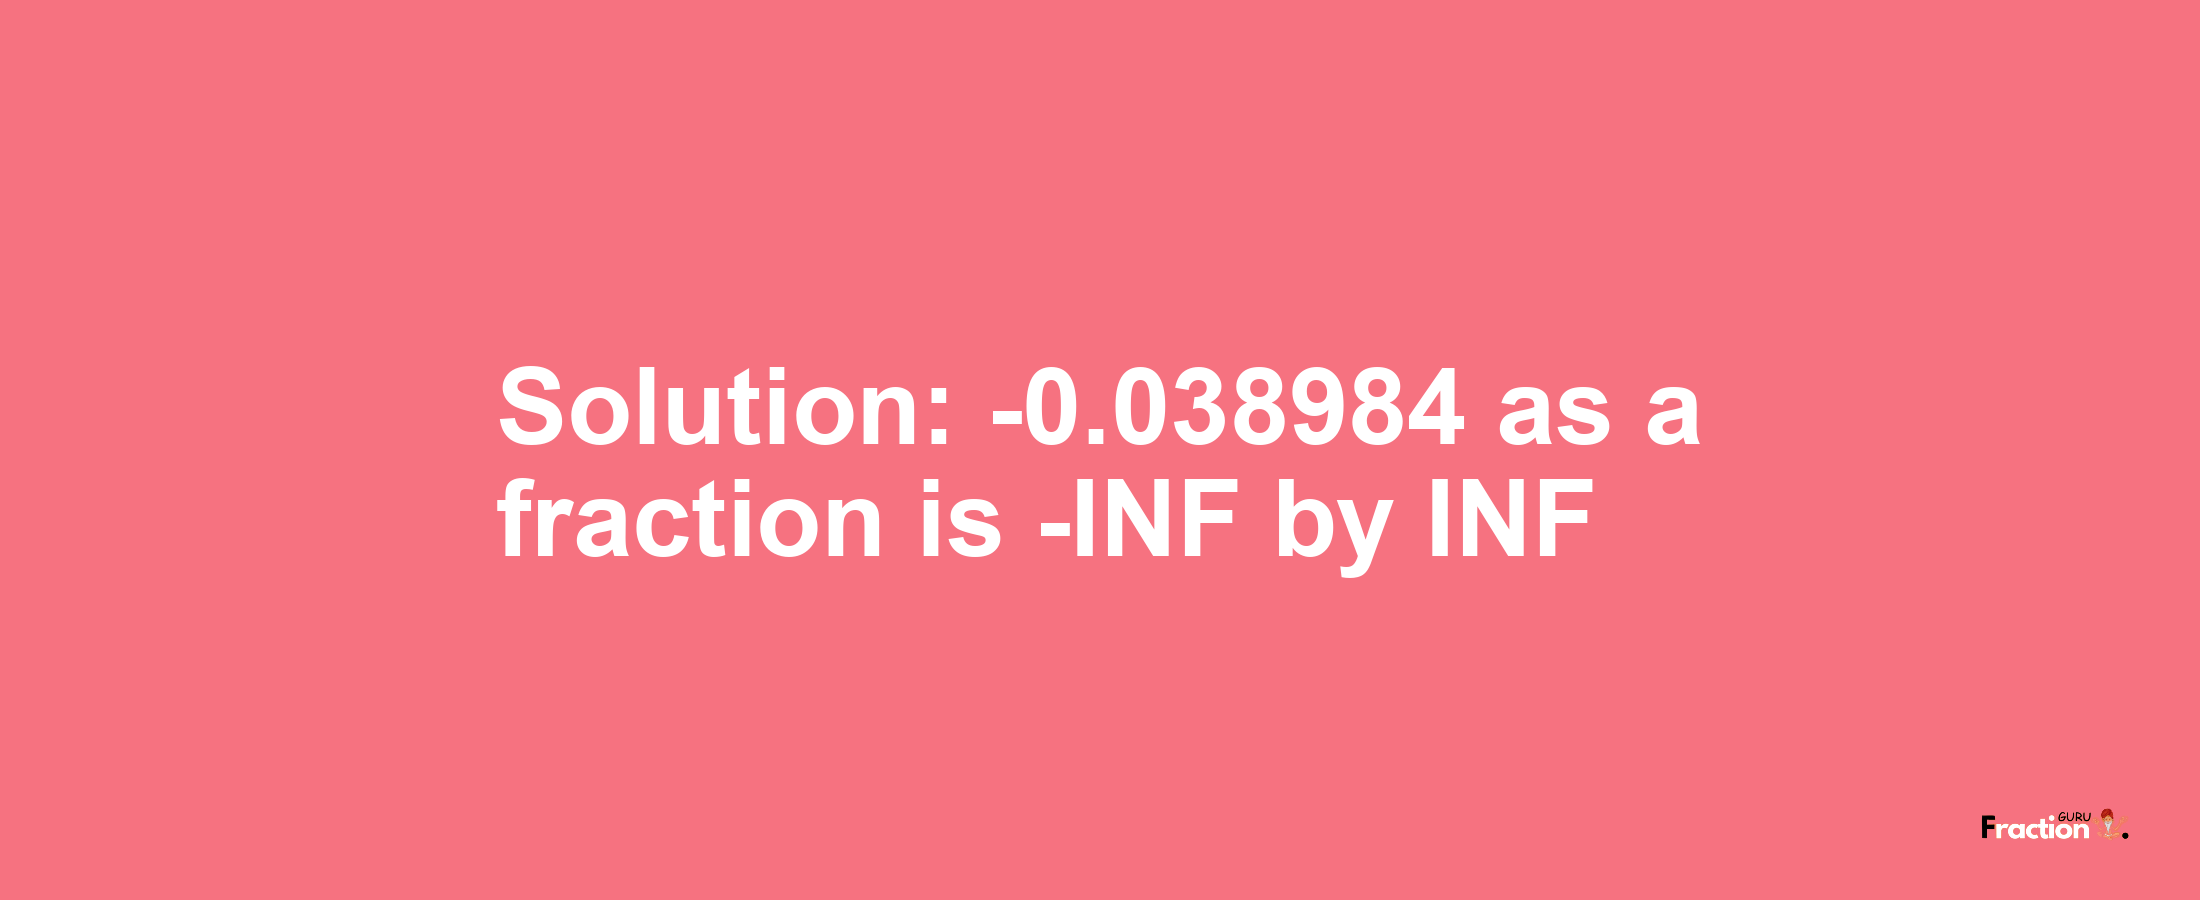 Solution:-0.038984 as a fraction is -INF/INF